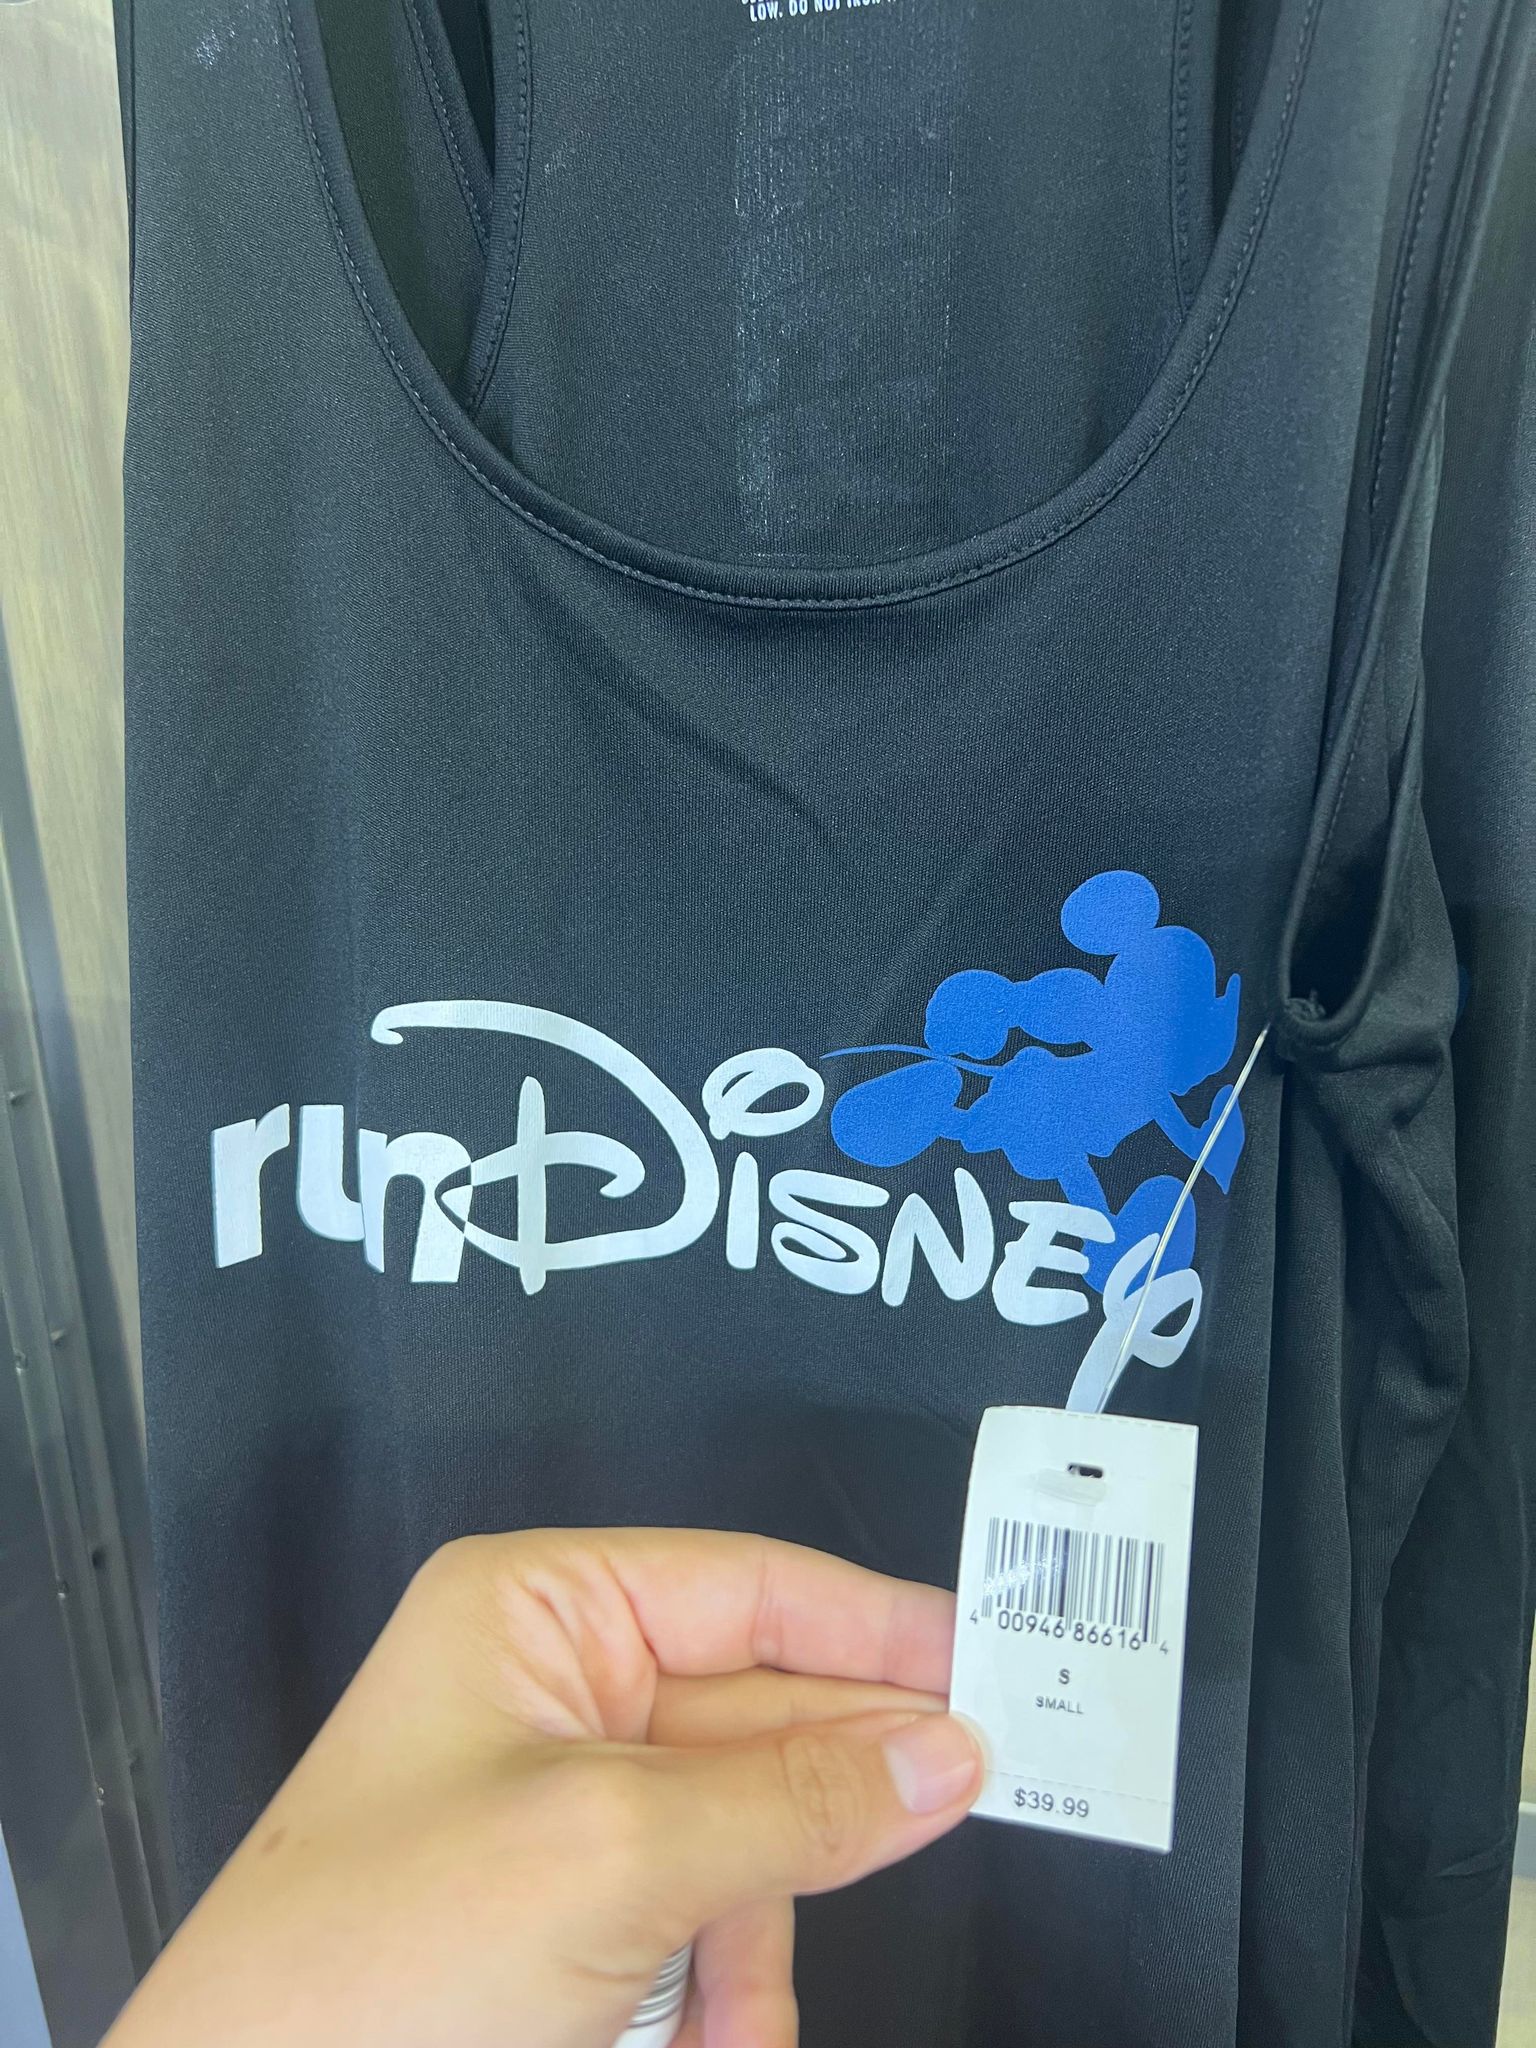 Get a First Look at the runDisney Expo Merch - MickeyBlog.com